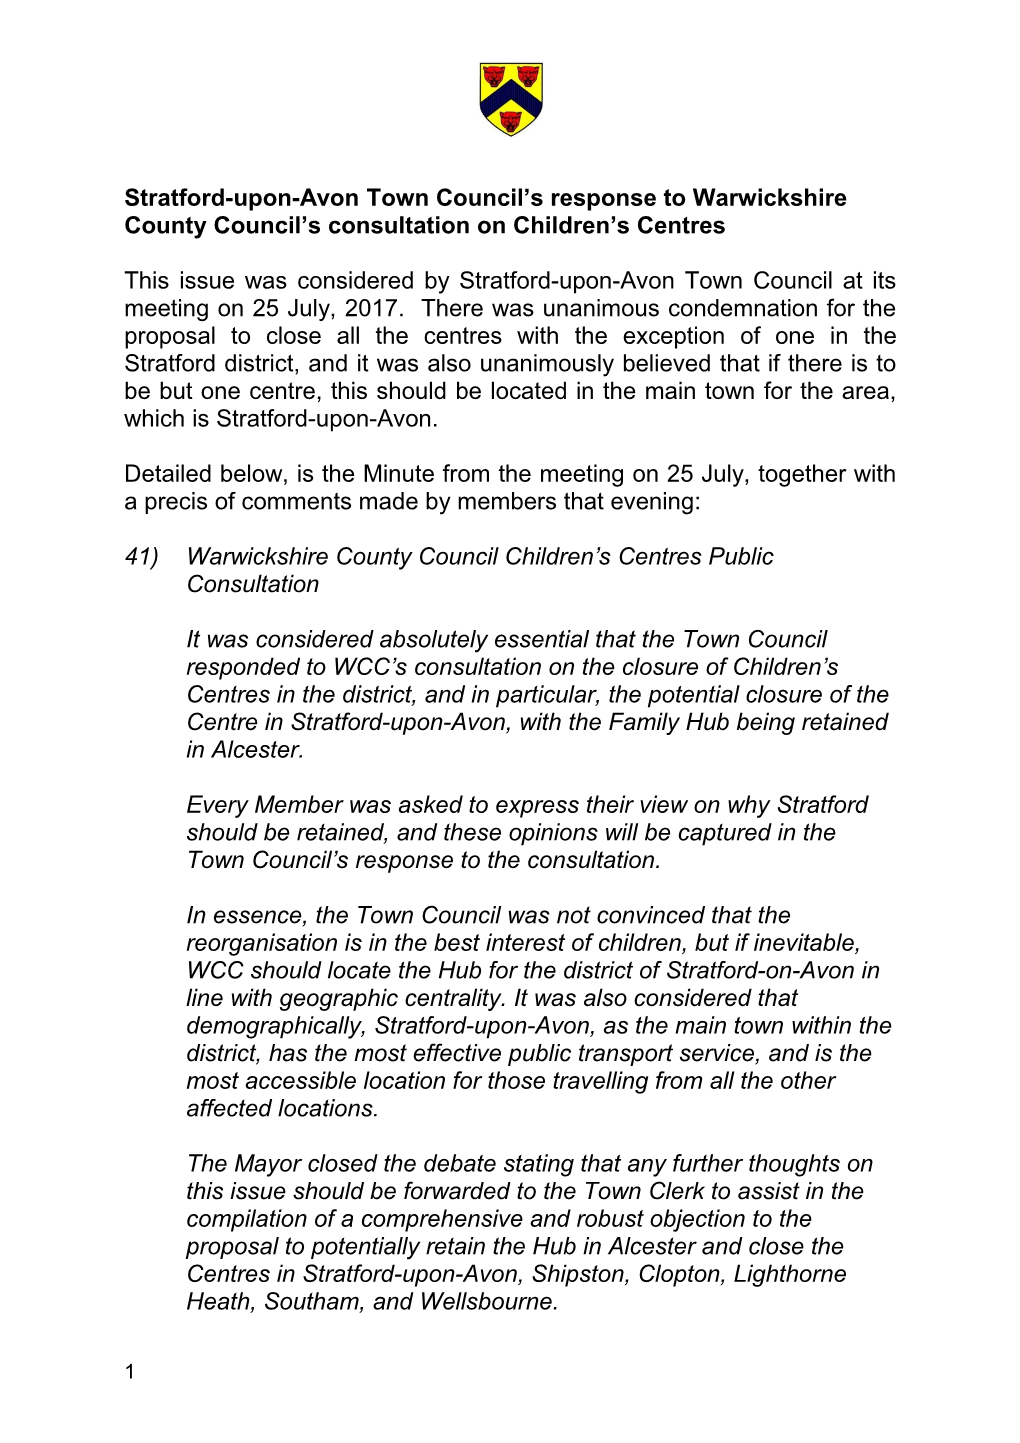 Stratford-Upon-Avon Town Council S Response to Warwickshire County Council S Consultation